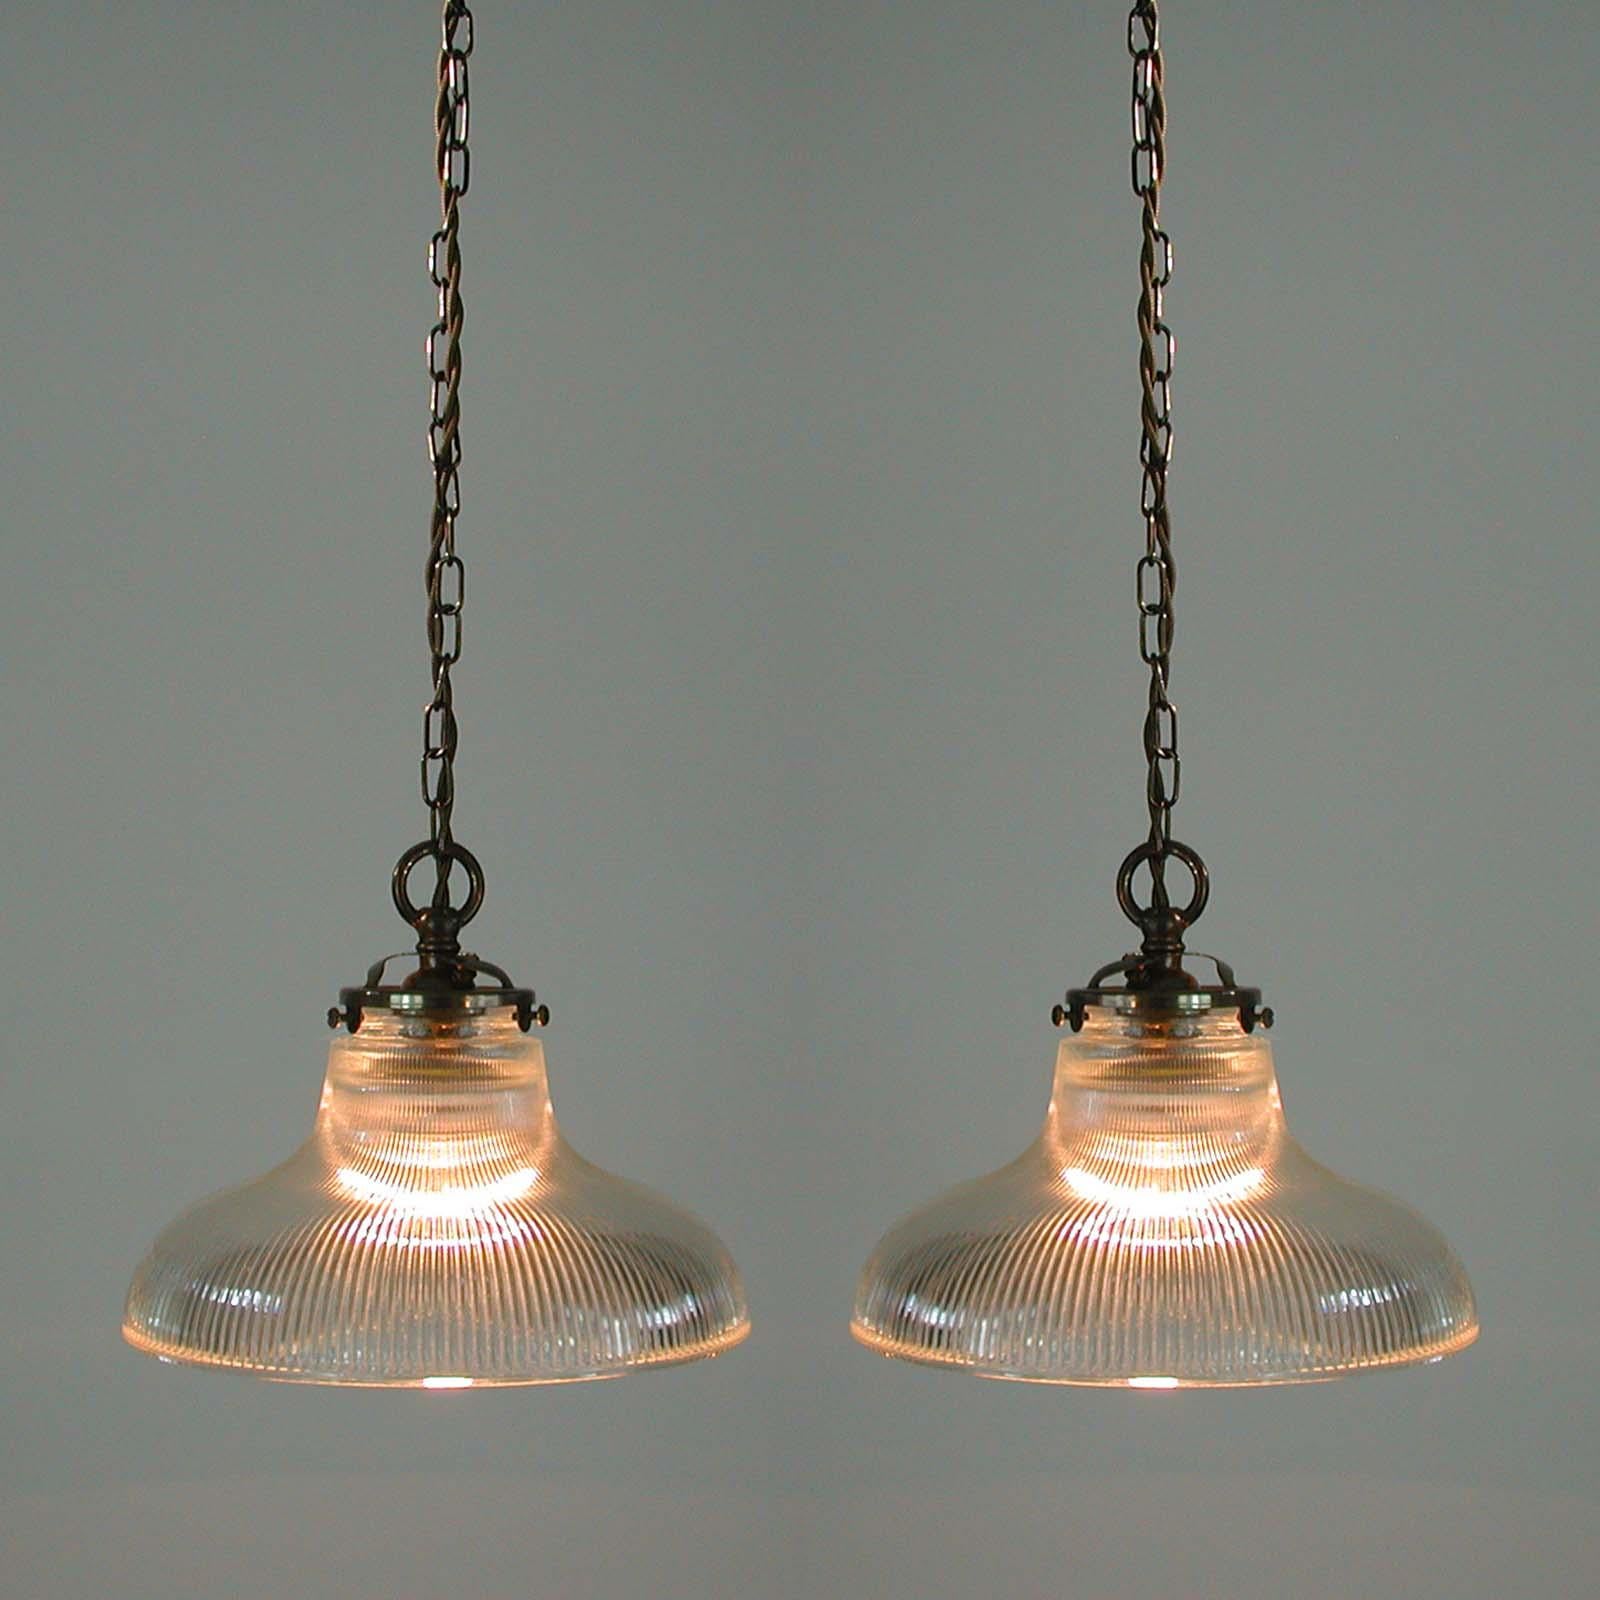 These Art Deco style dome shaped pendant lights were made in France in the 1950s. They feature a clear prismatic glass Holophane lamp shade and patinated brass glass holder, chain and canopy. 

The glass gives off the best quality light. It is